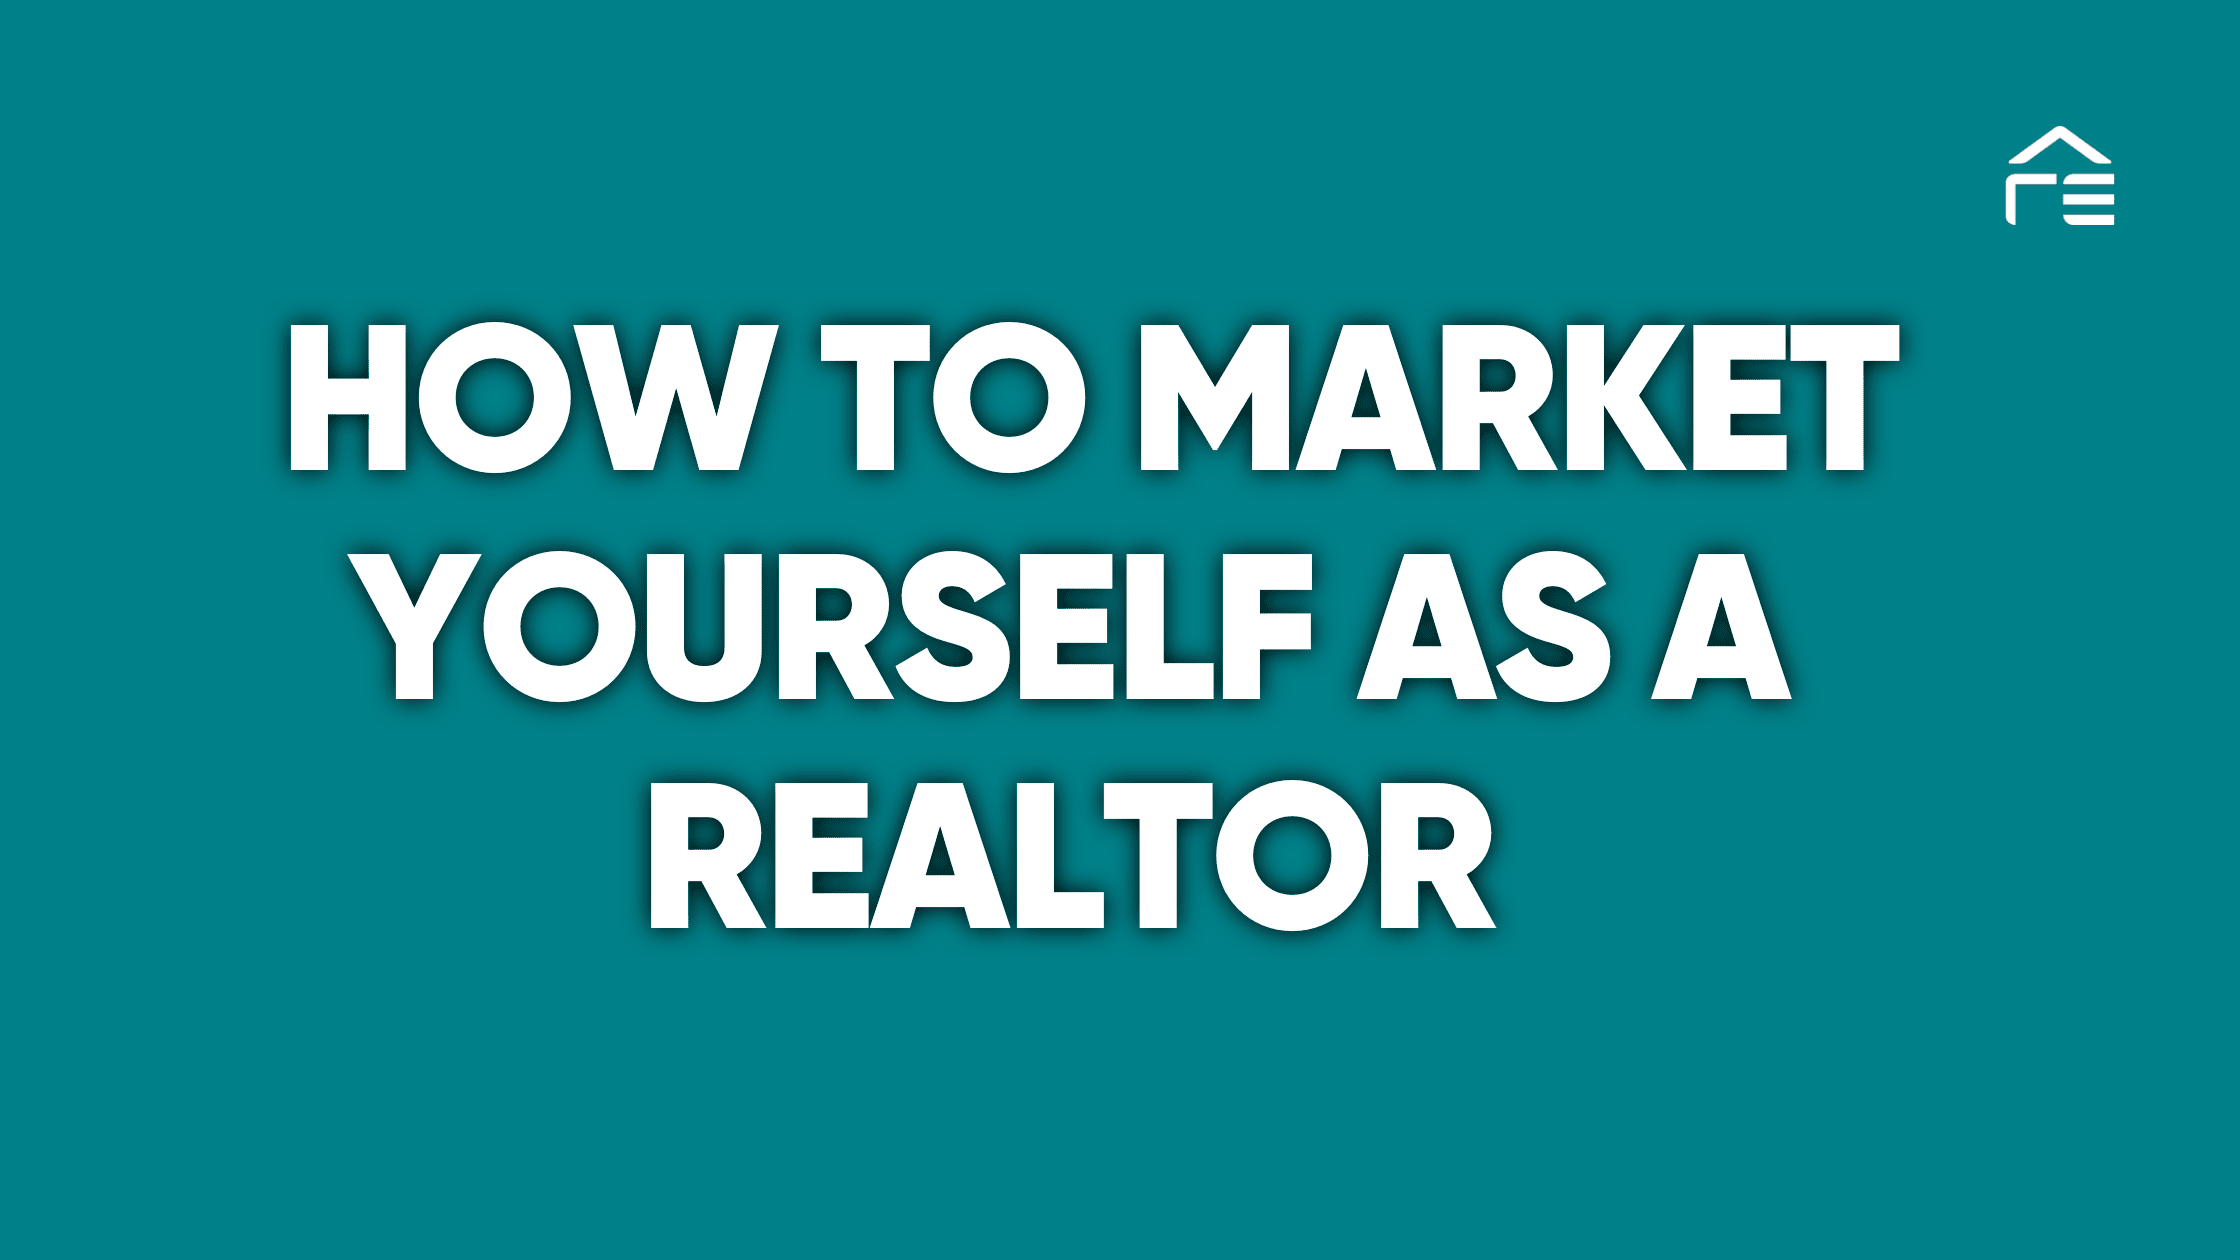 How to Market Yourself as a Realtor